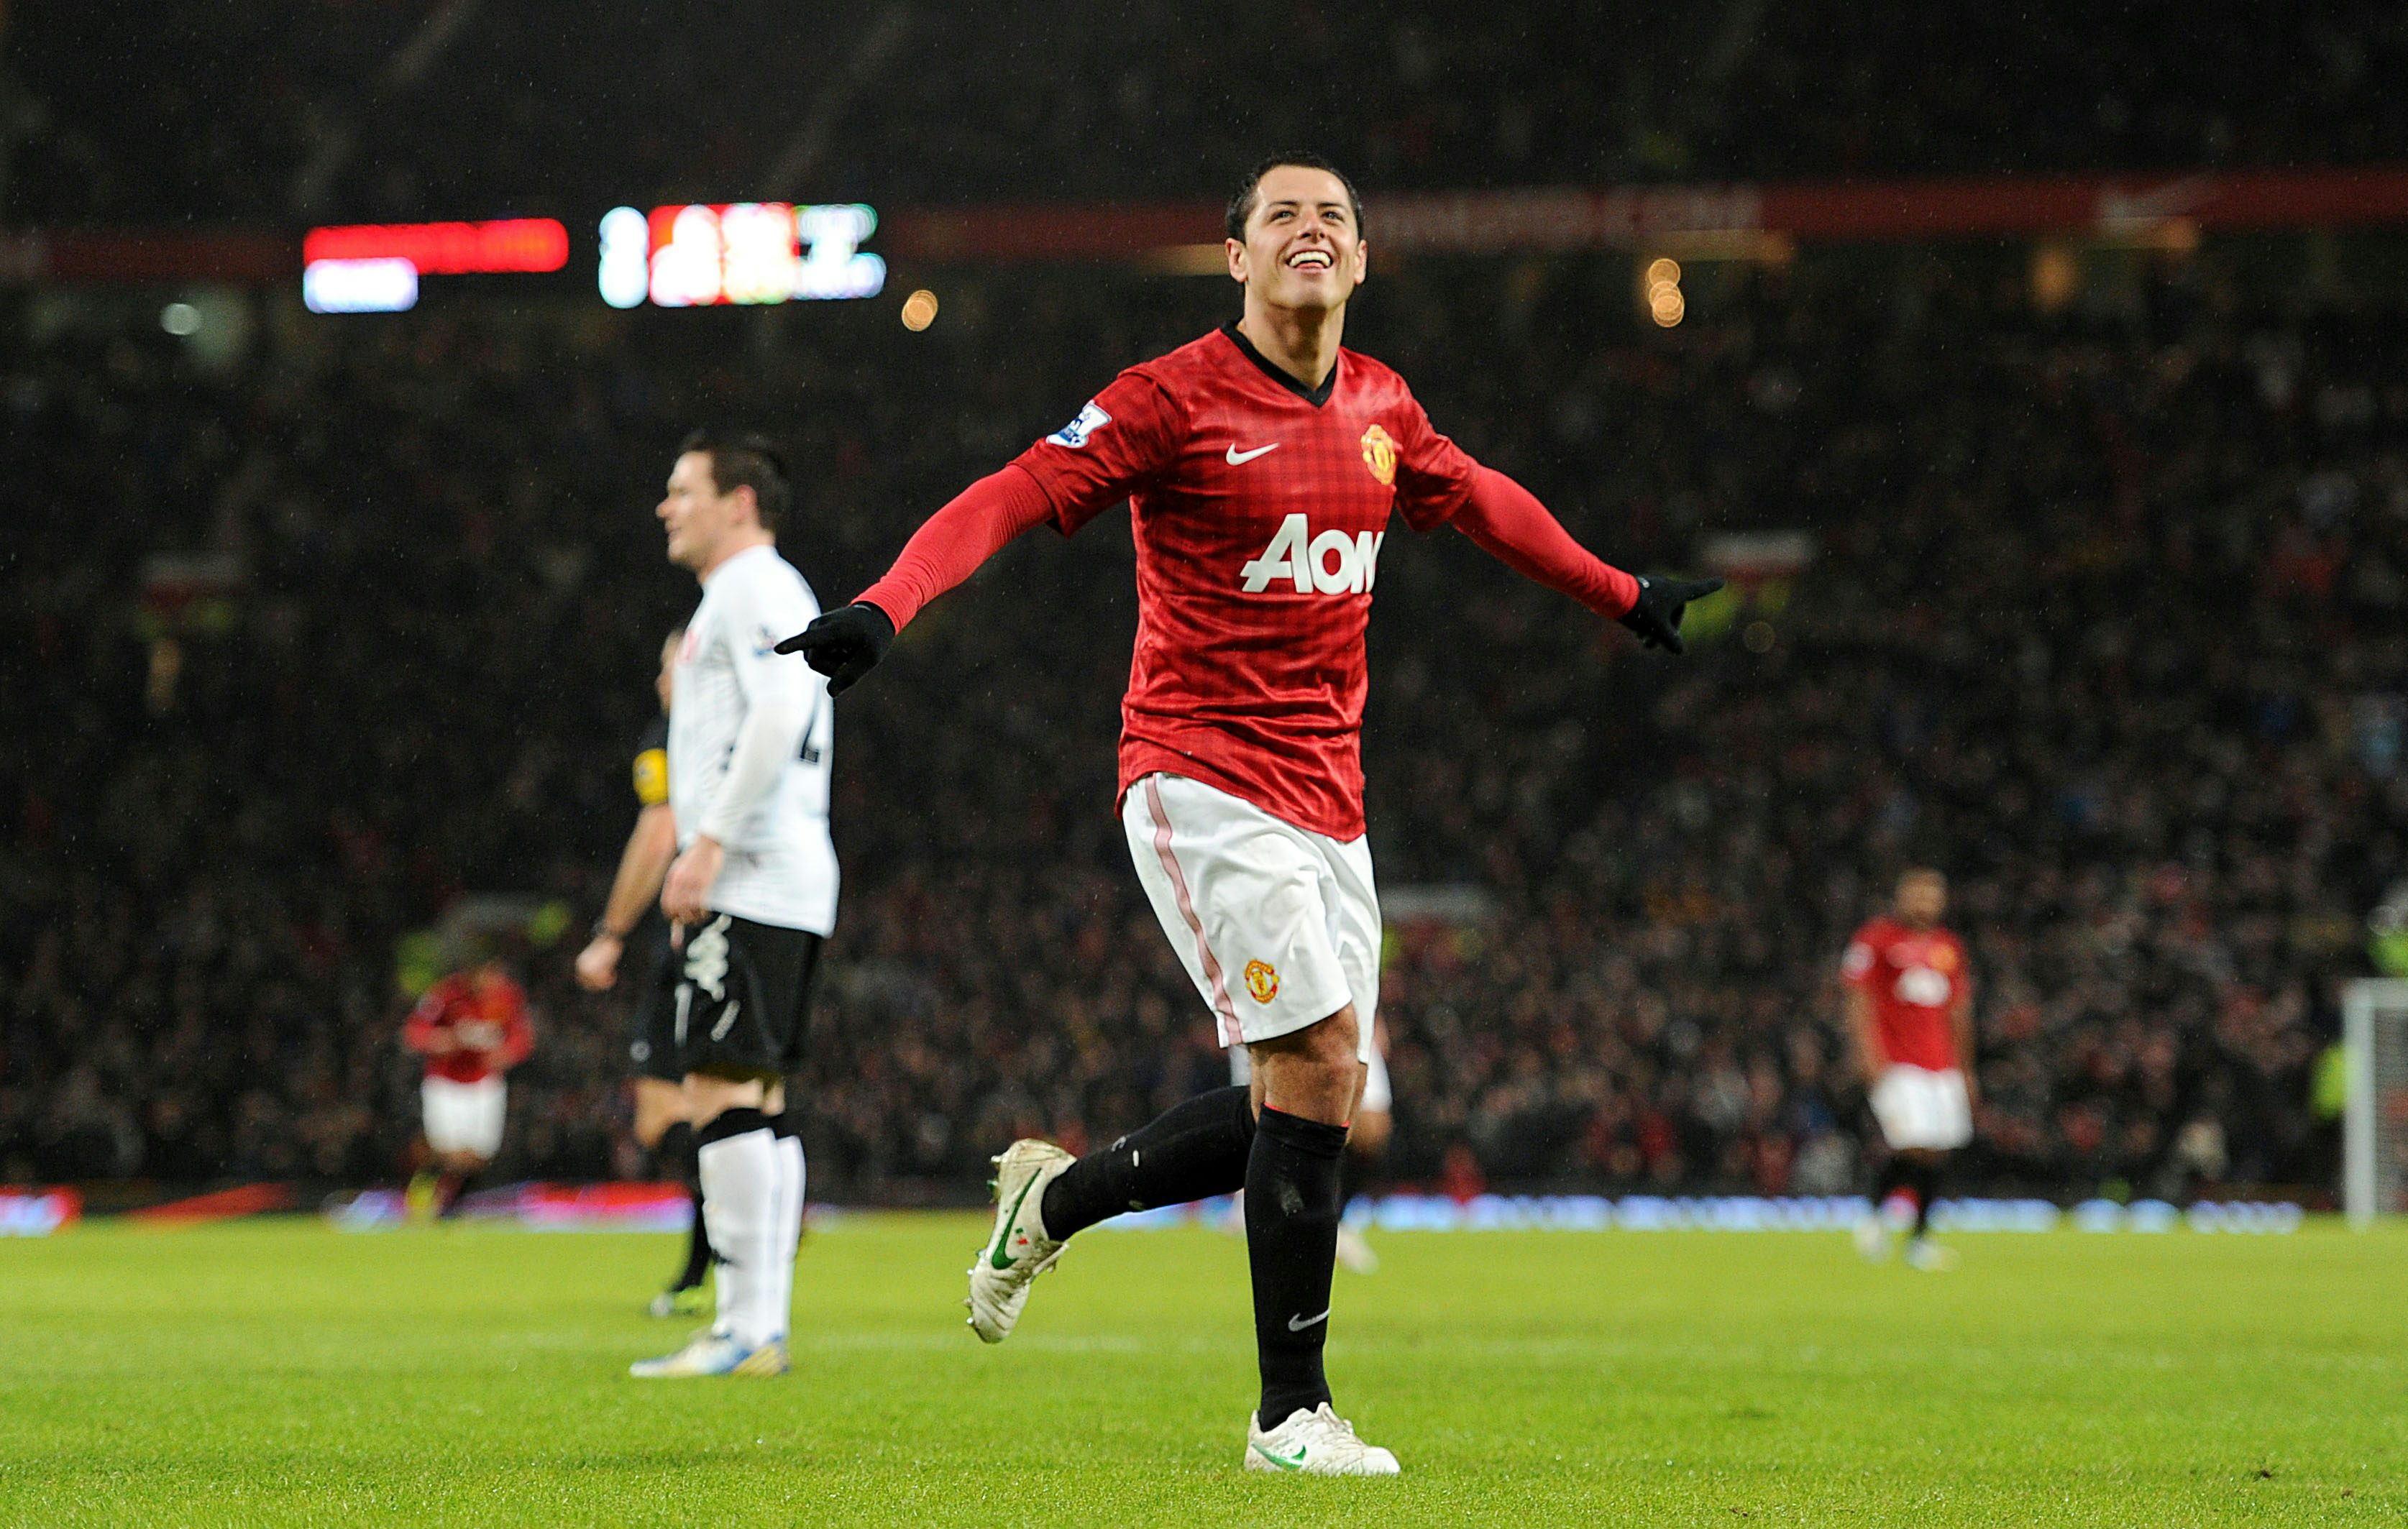 Manchester United striker Javier Hernandez celebrates scoring his second goal in his sides match against Fulham on January 26, 2012